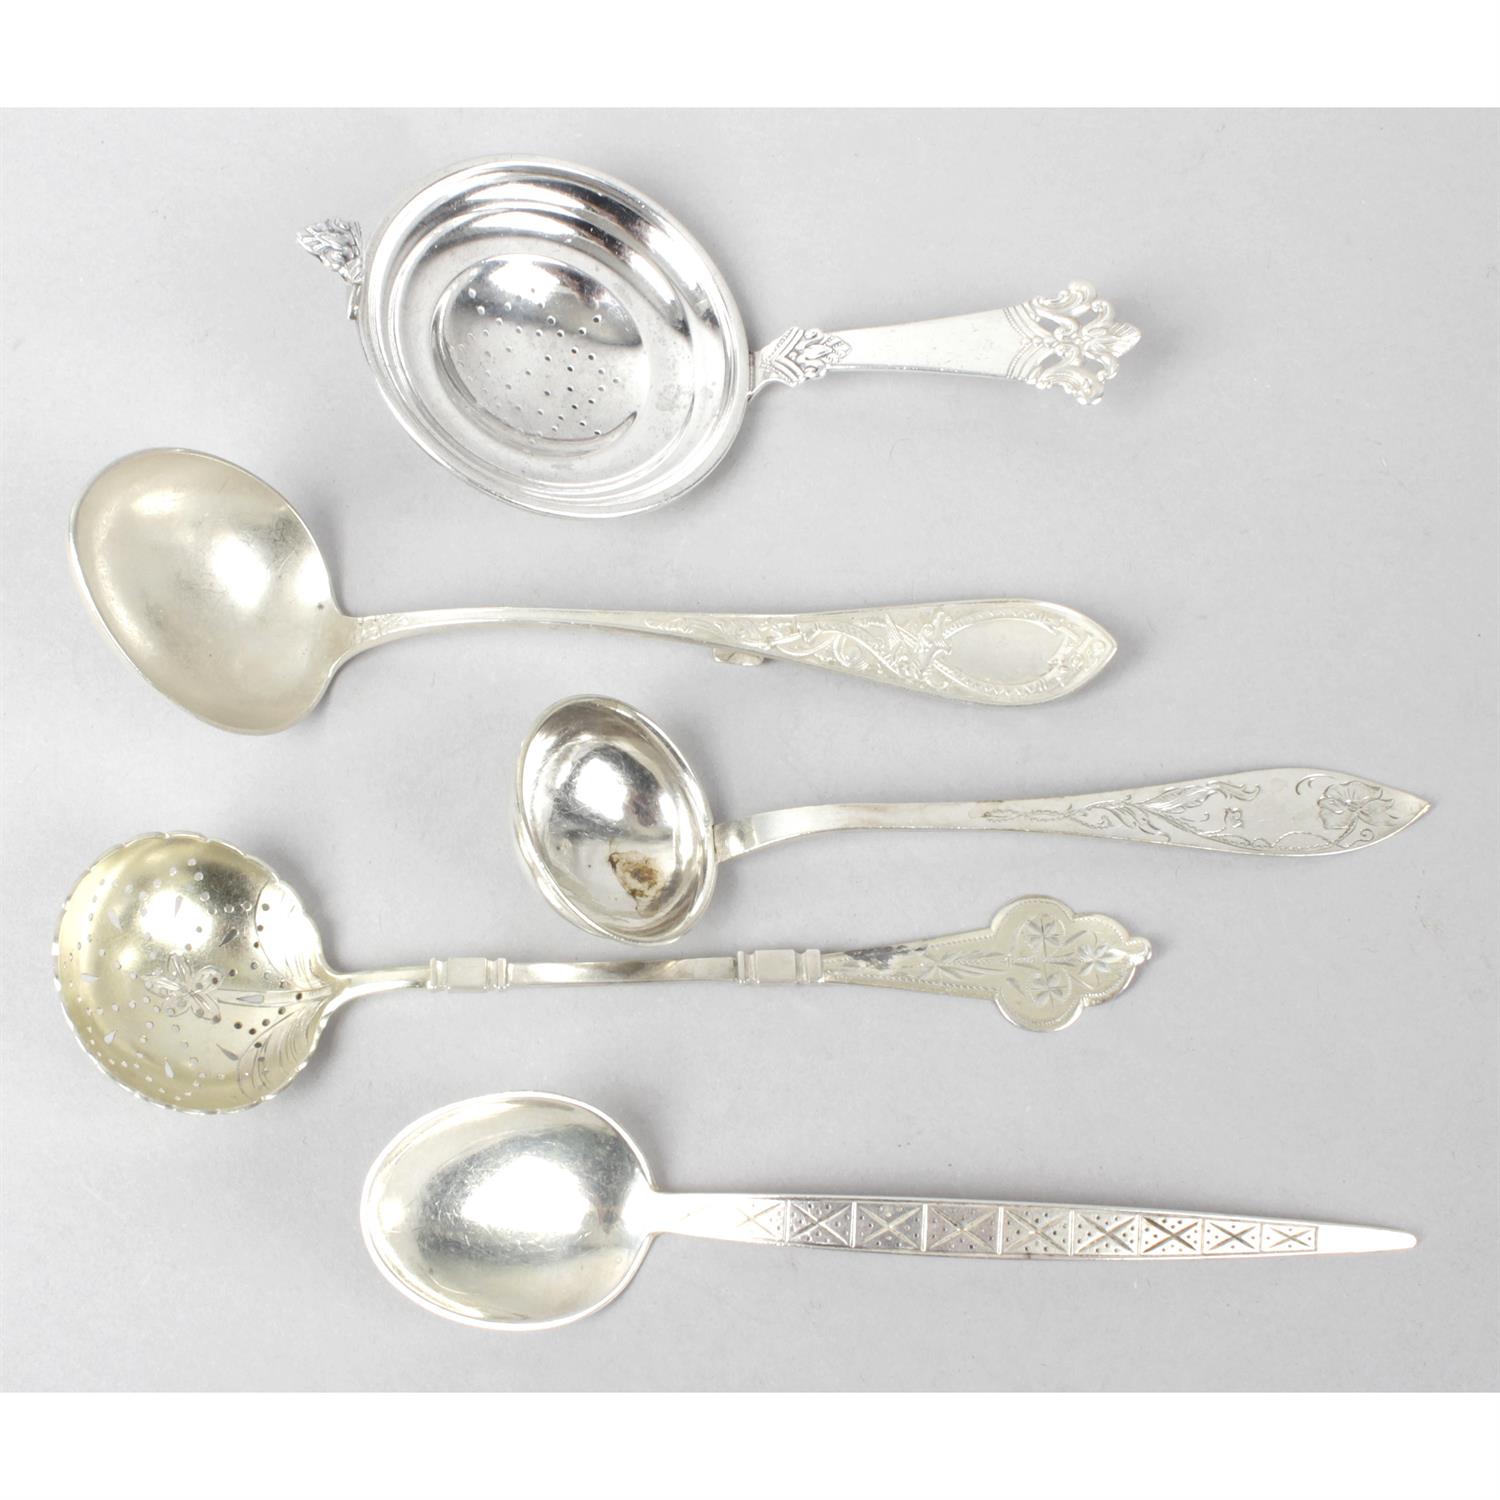 A miscellaneous selection of small spoons, plus a butter knife, tea strainer and four assorted